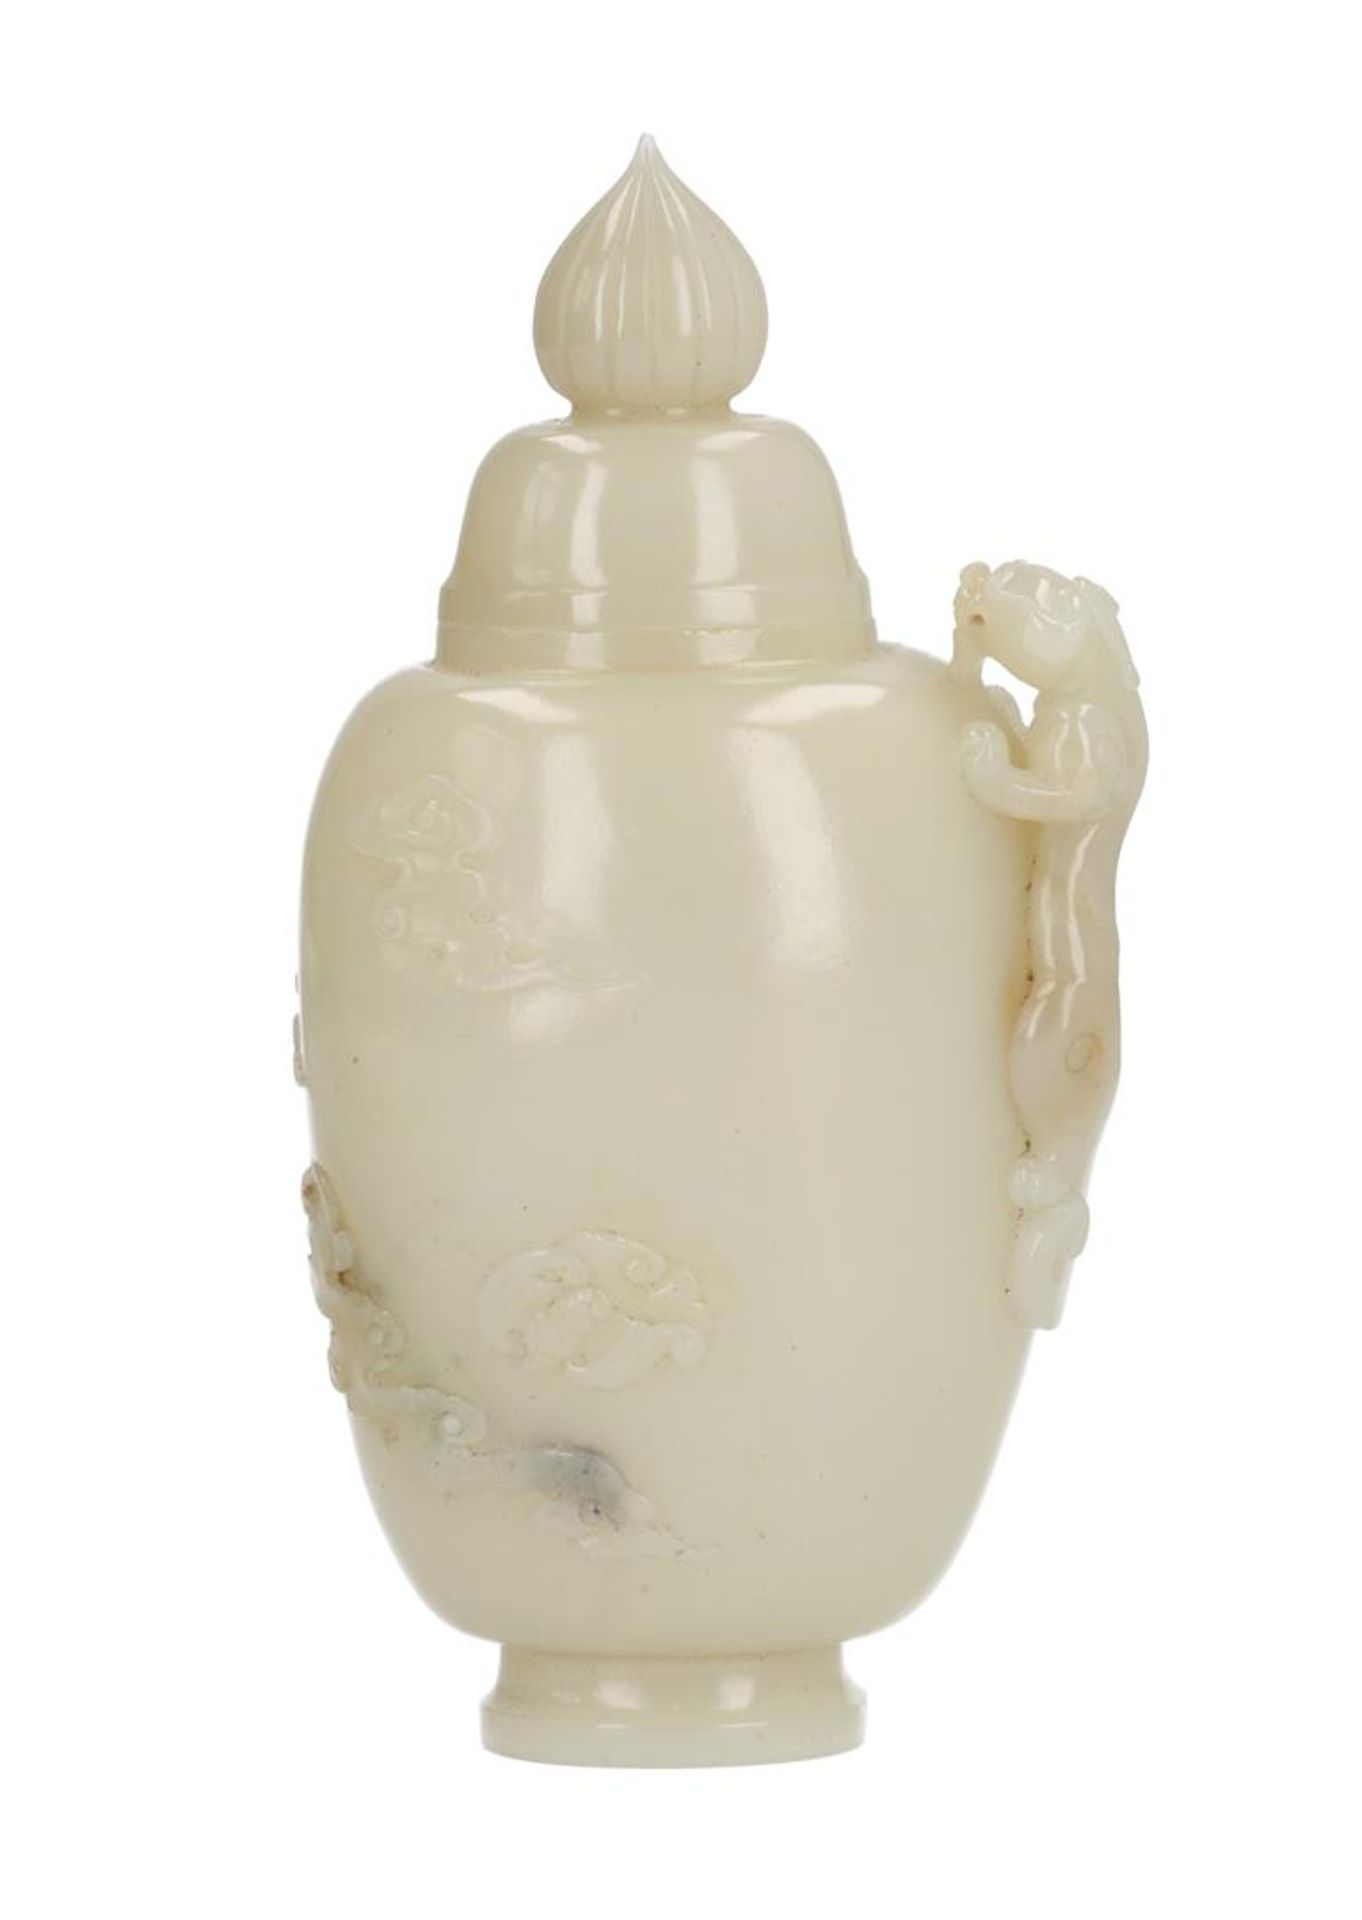 A jade lidded jar, decorated with a dragon and bats in relief. Unmarked. China, 20th century. In